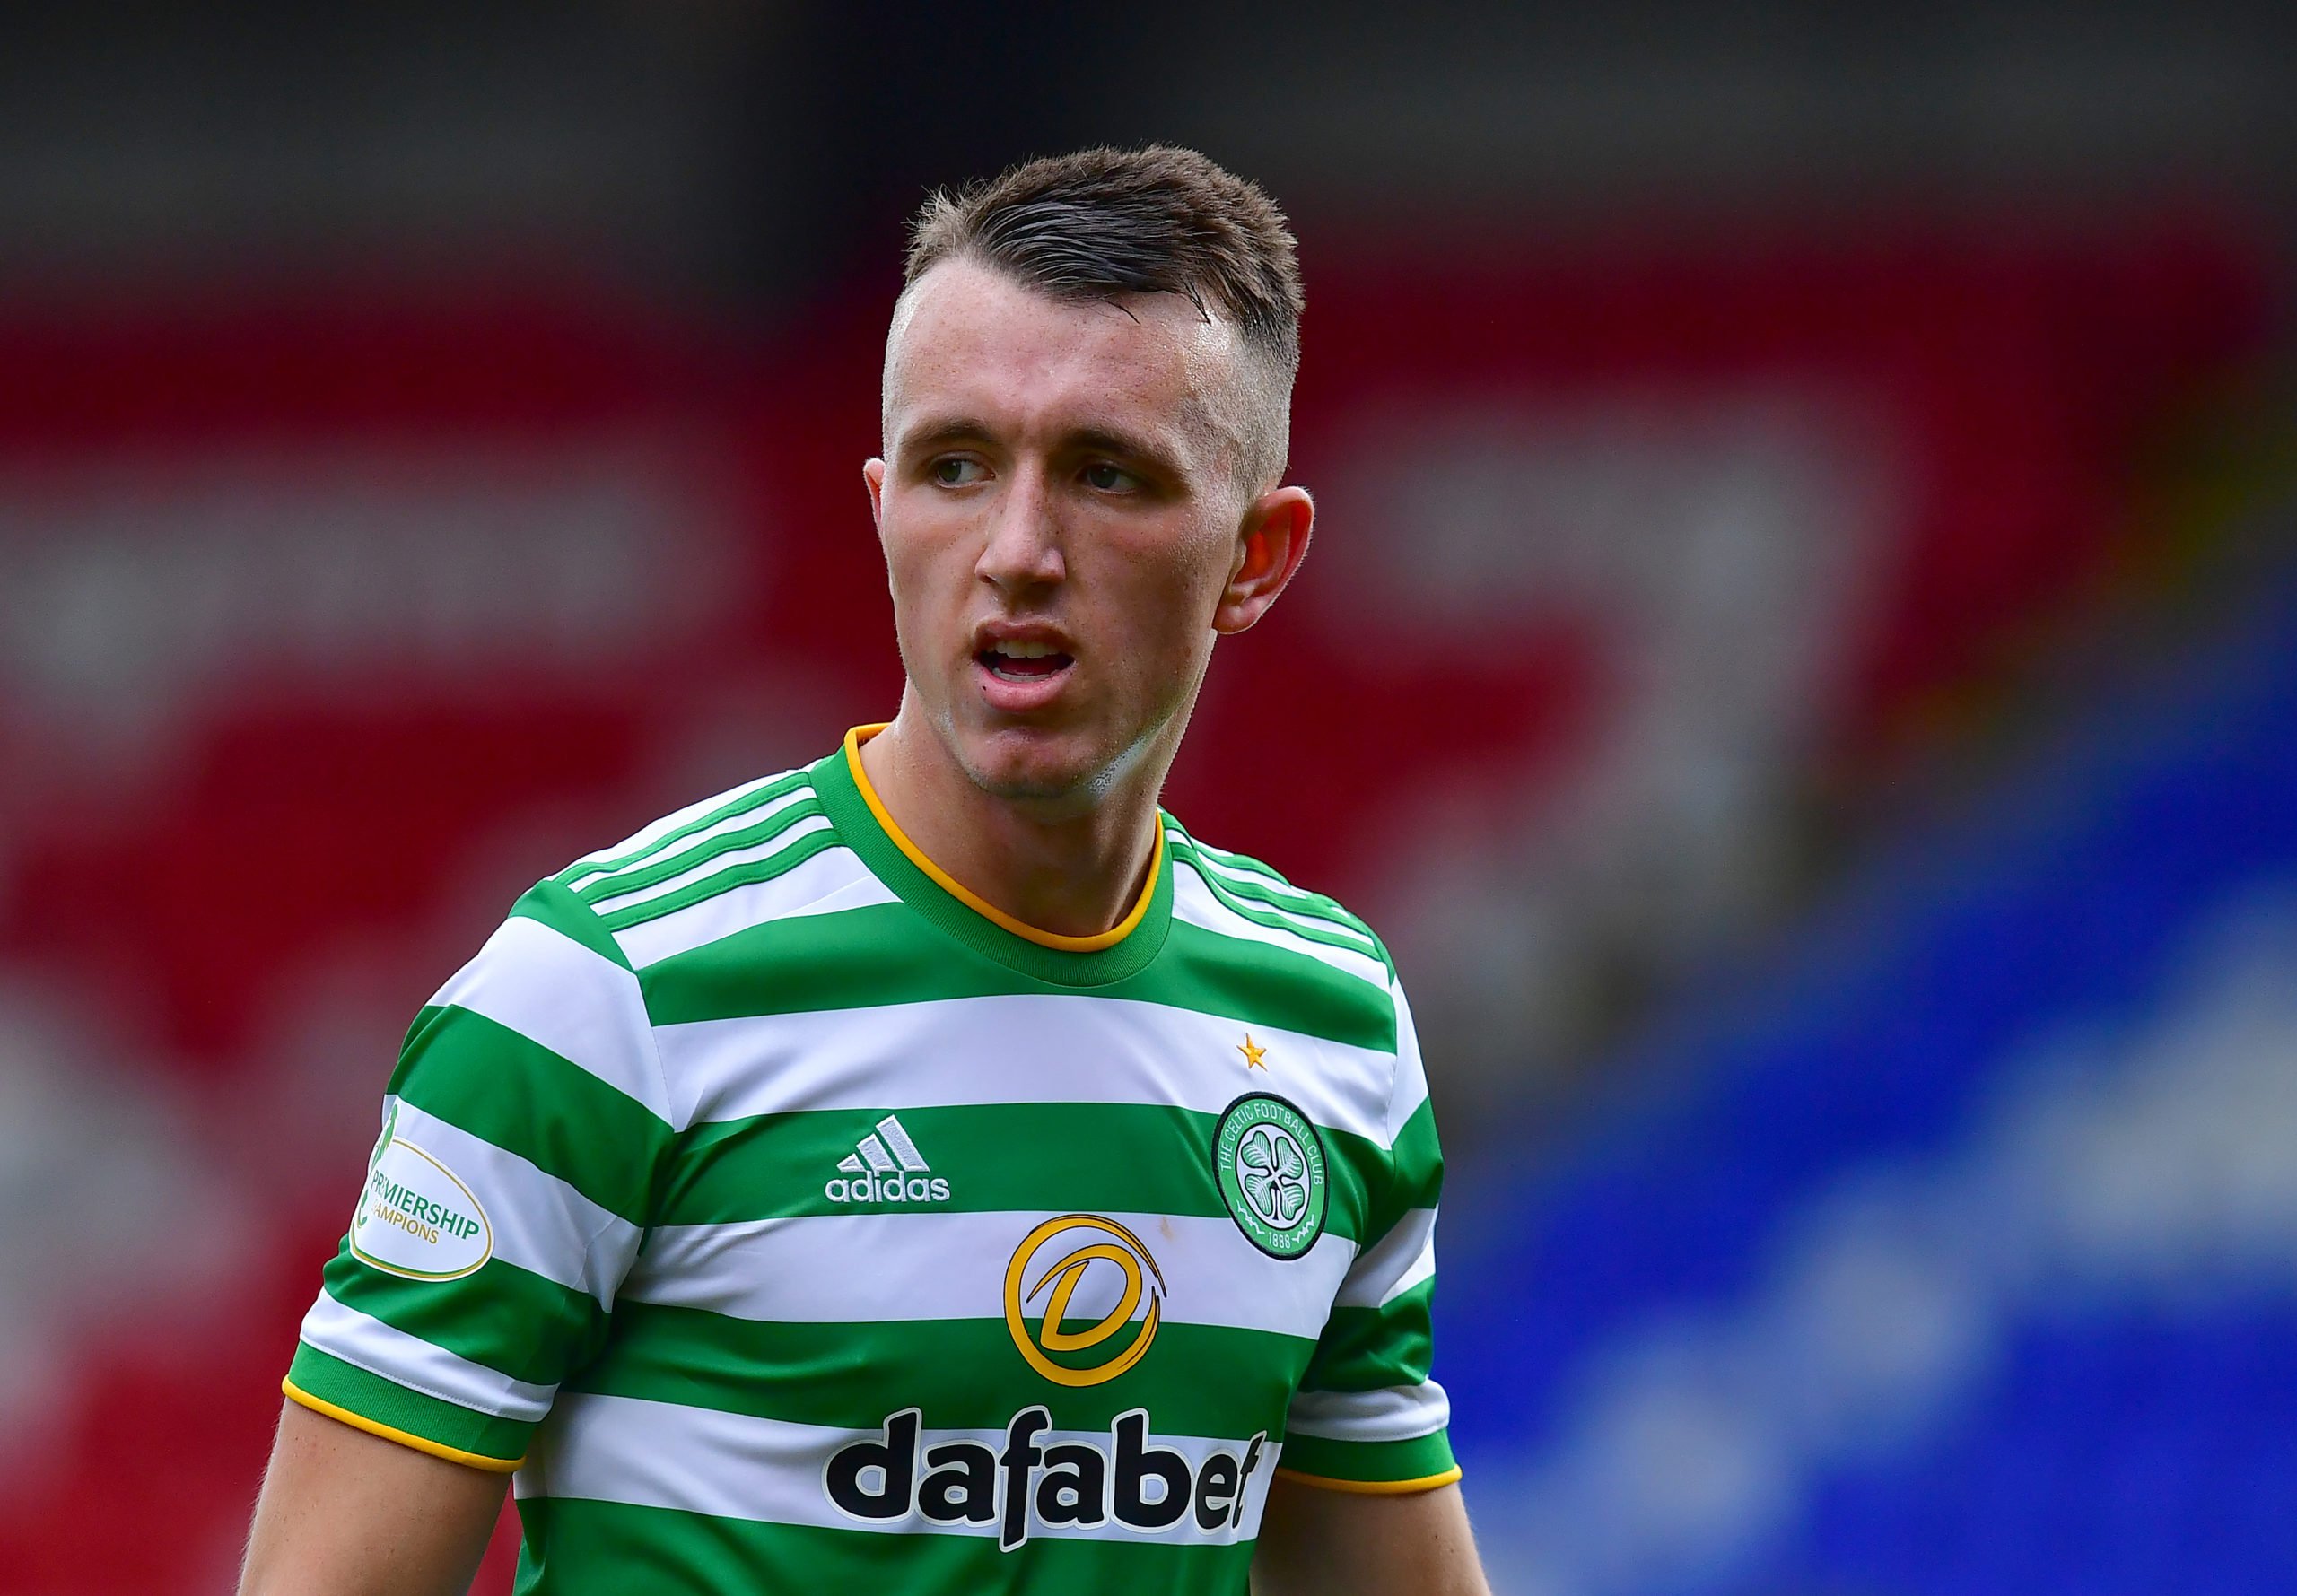 David Turnbull tests positive for COVID-19; photos and footage show him training with Celtic on Friday